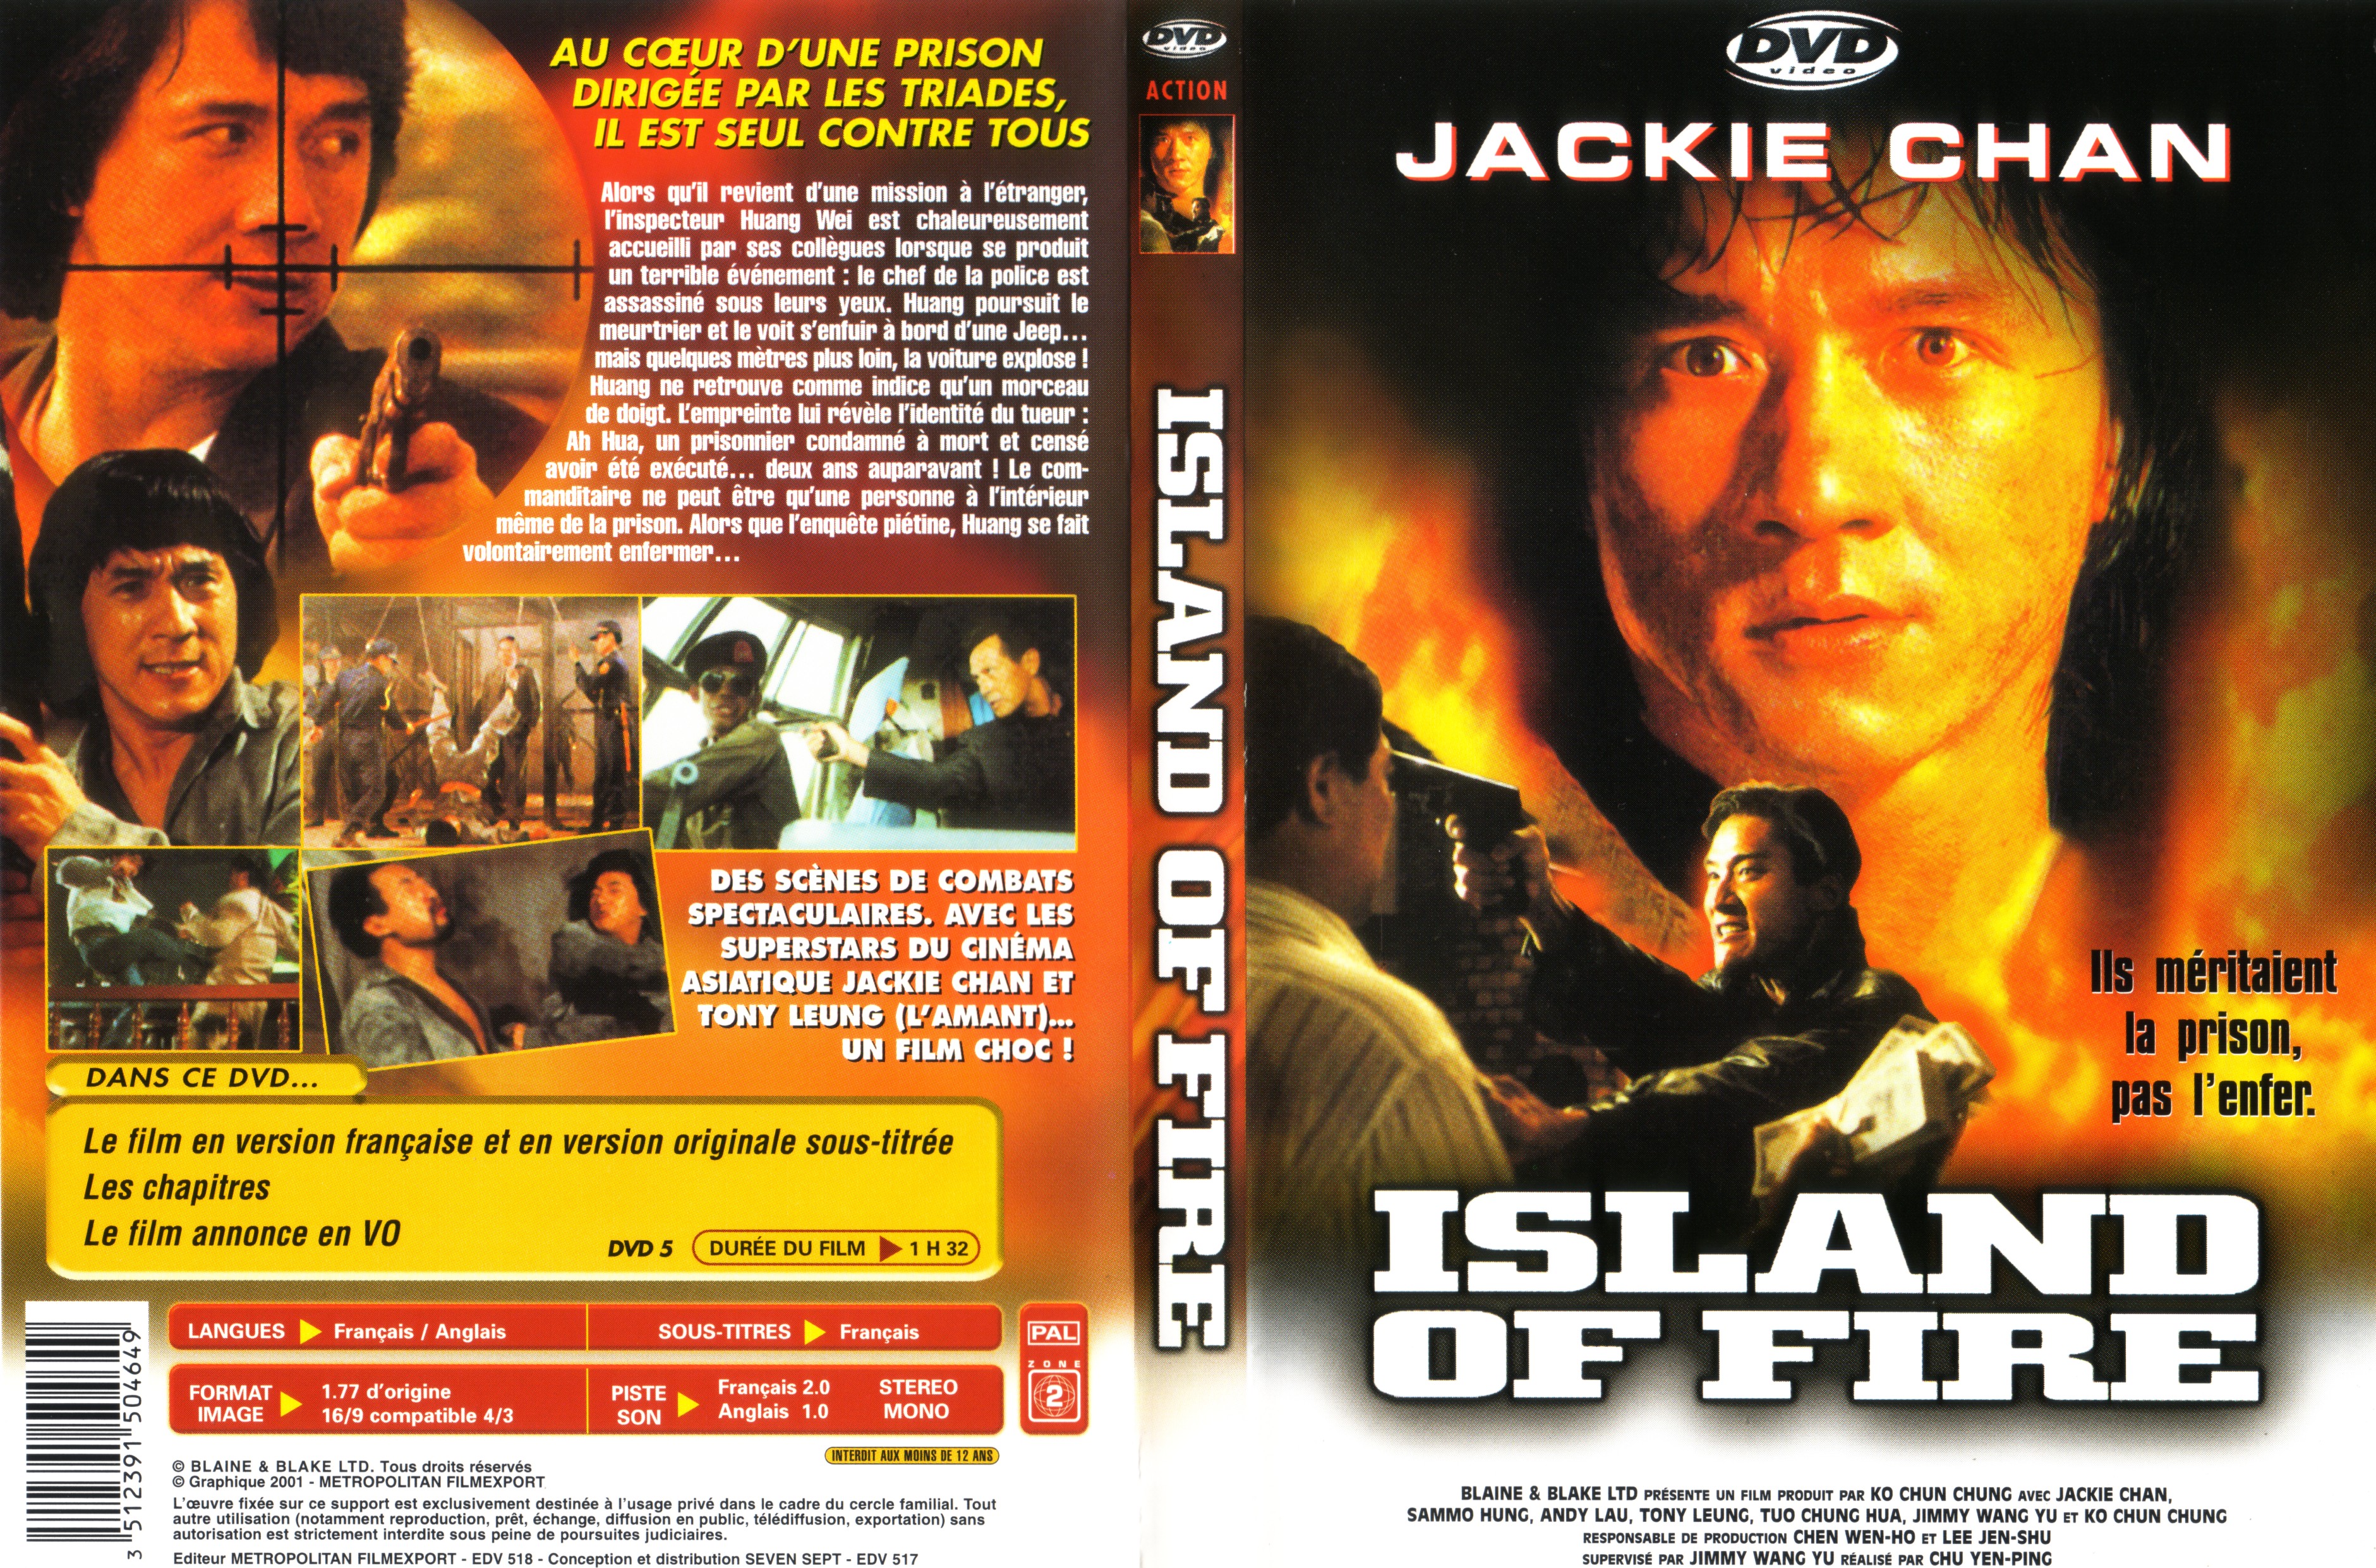 Jaquette DVD Island of fire